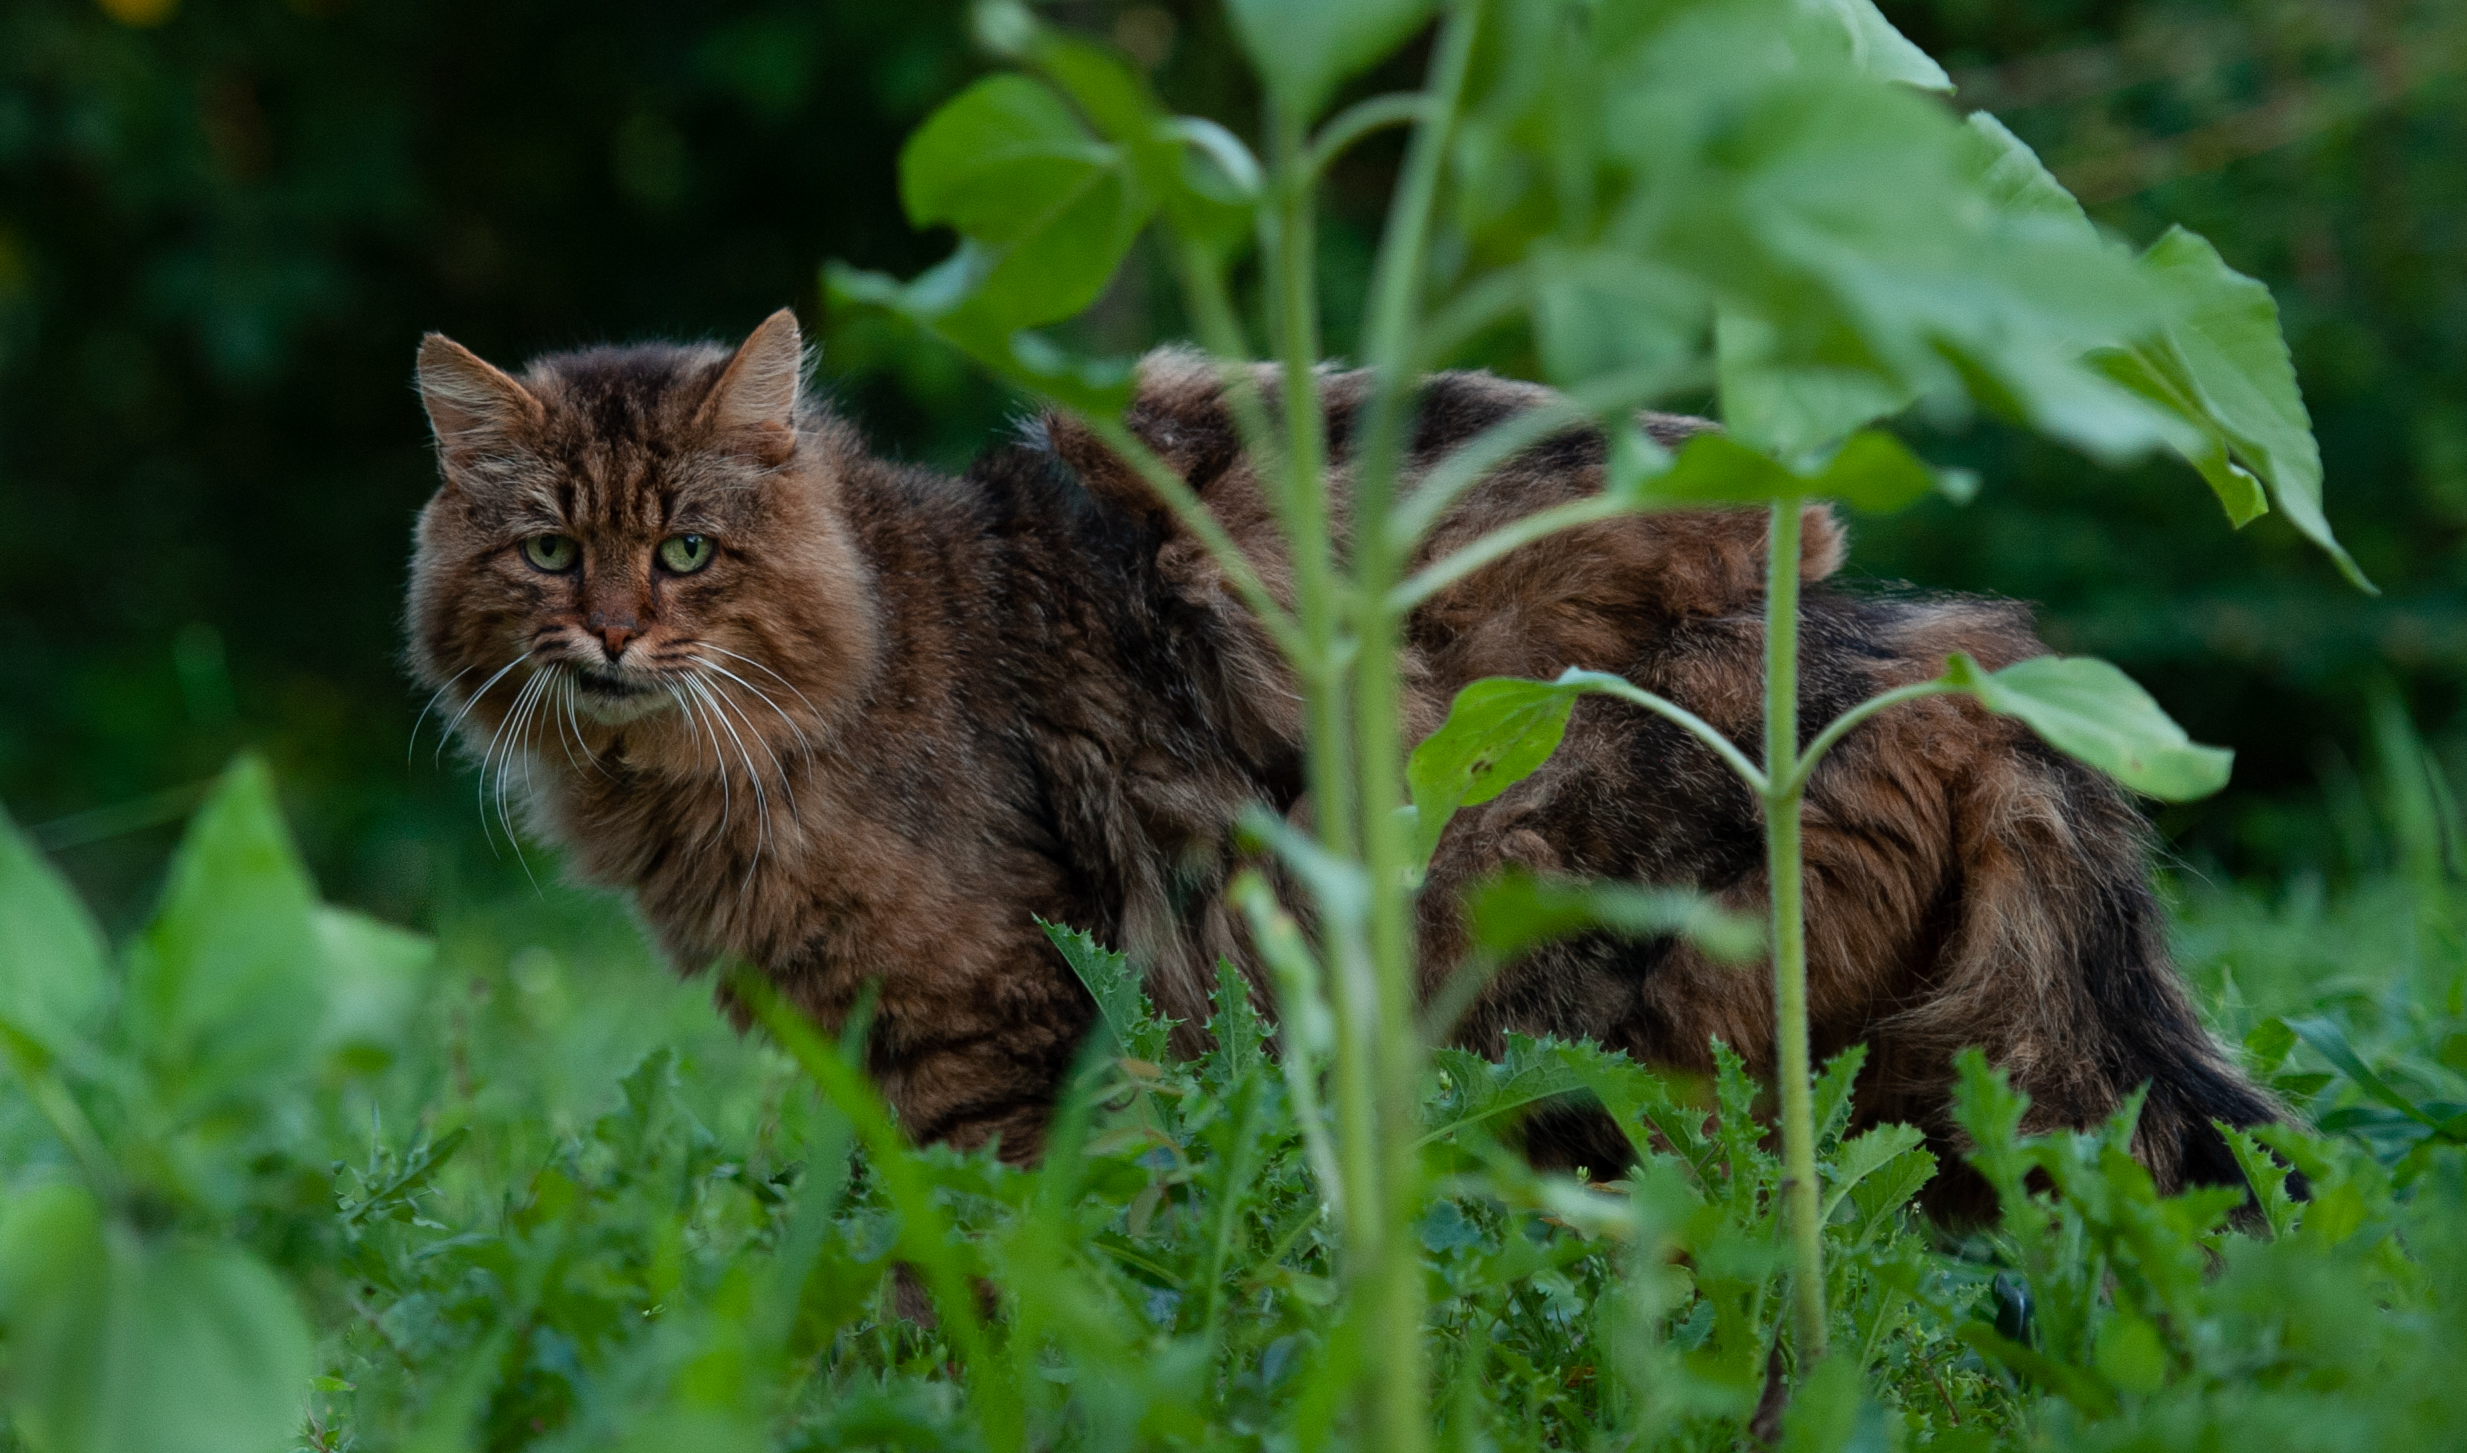 The same cat as before standing behind the green stems of some sunflowers. Its right flew is pulled up, giving it a very annoyed look.